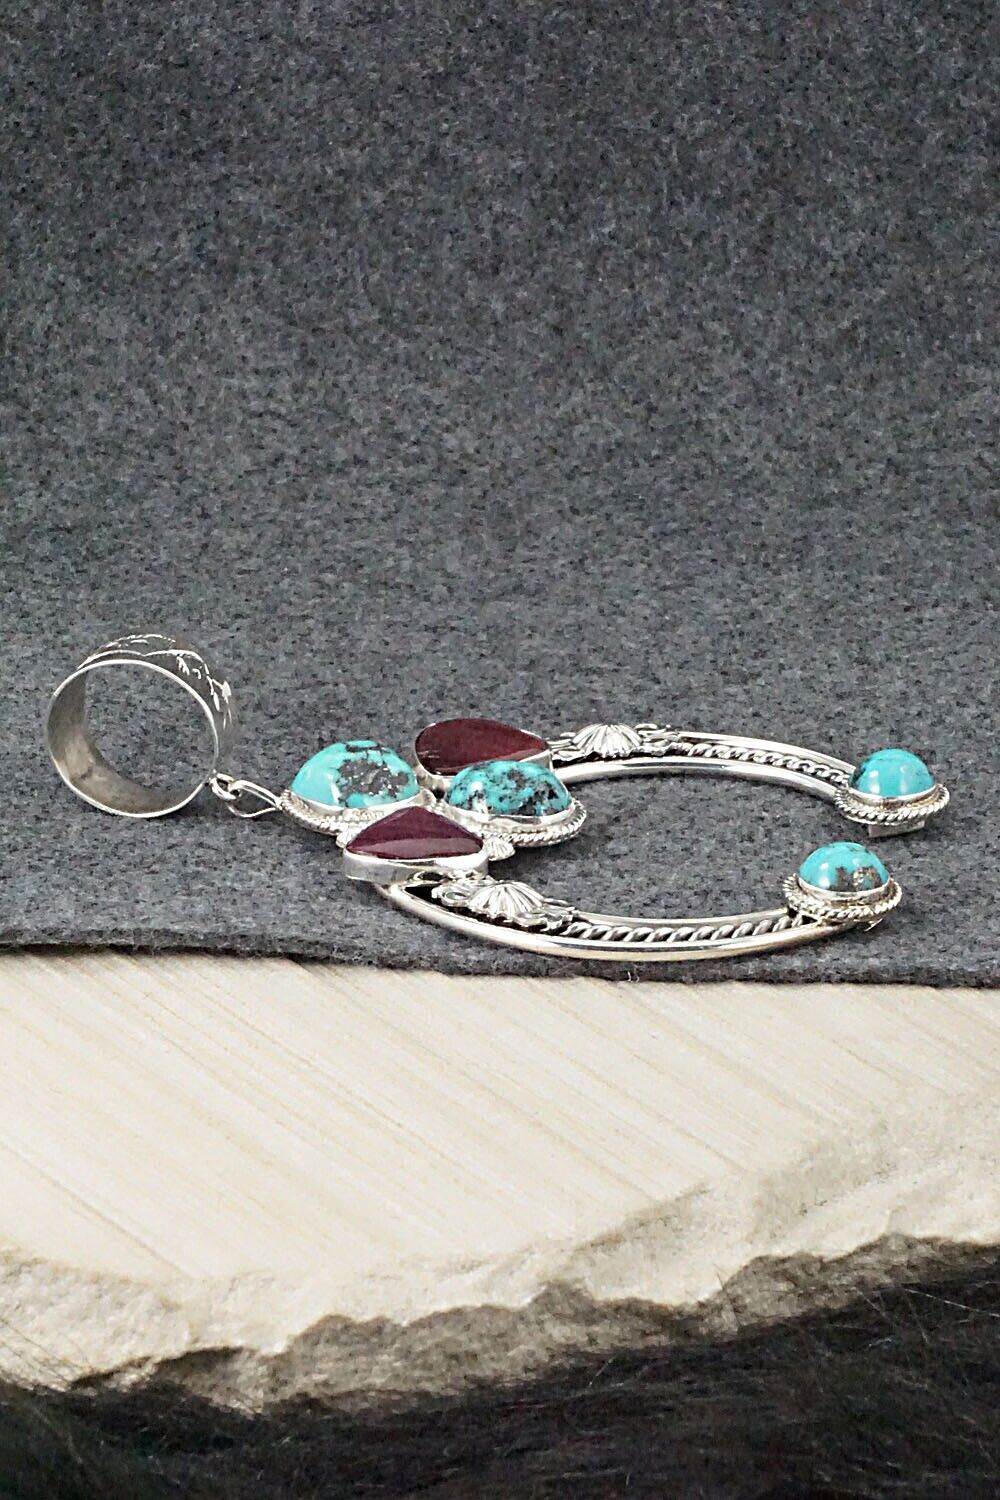 Turquoise, Spiny Oyster and Sterling Silver Pendant - Derrick Gordon